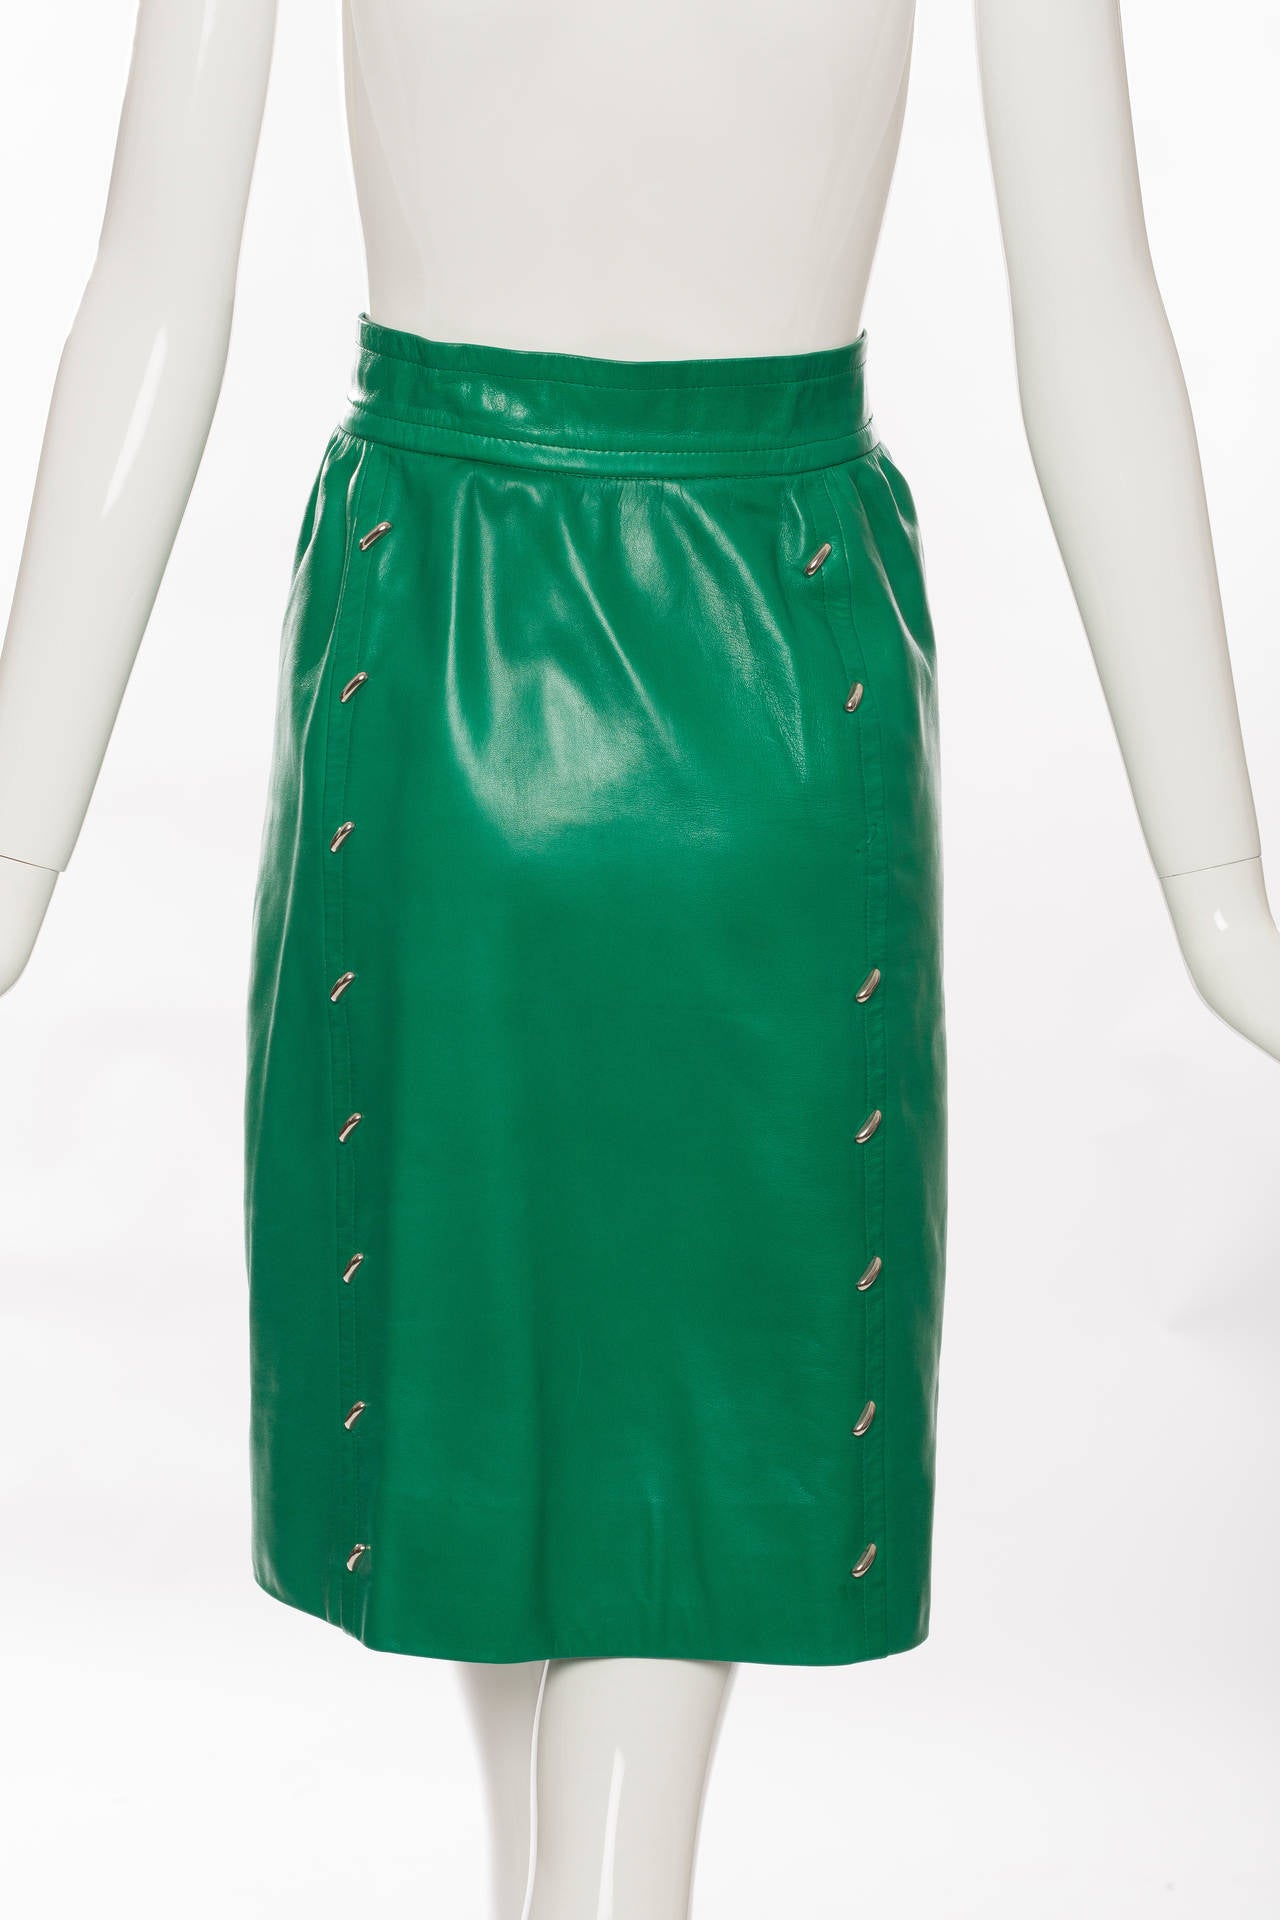 Givenchy Couture Green Leather Studded Skirt Suit, Circa 1980s In Good Condition For Sale In Cincinnati, OH